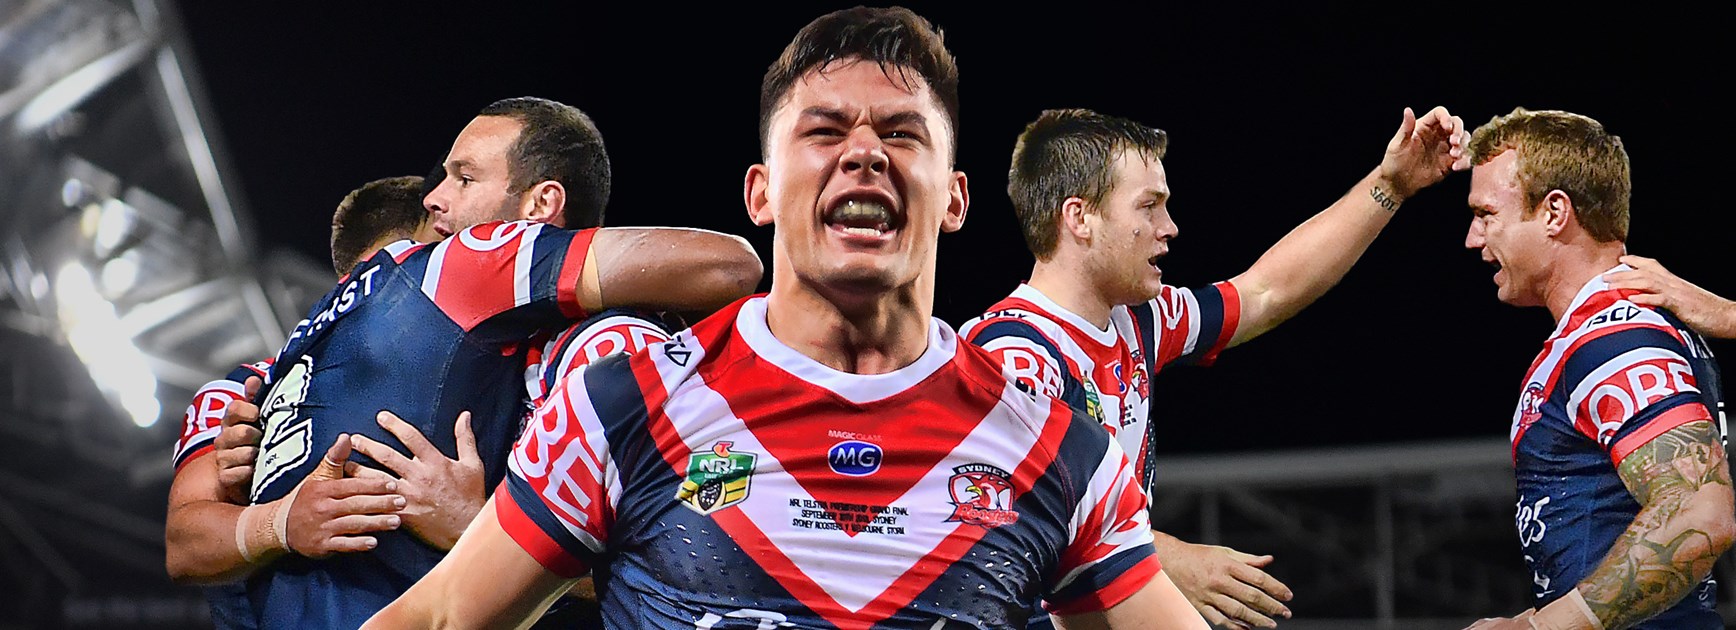 Cronk, Keary guide Roosters to grand final glory